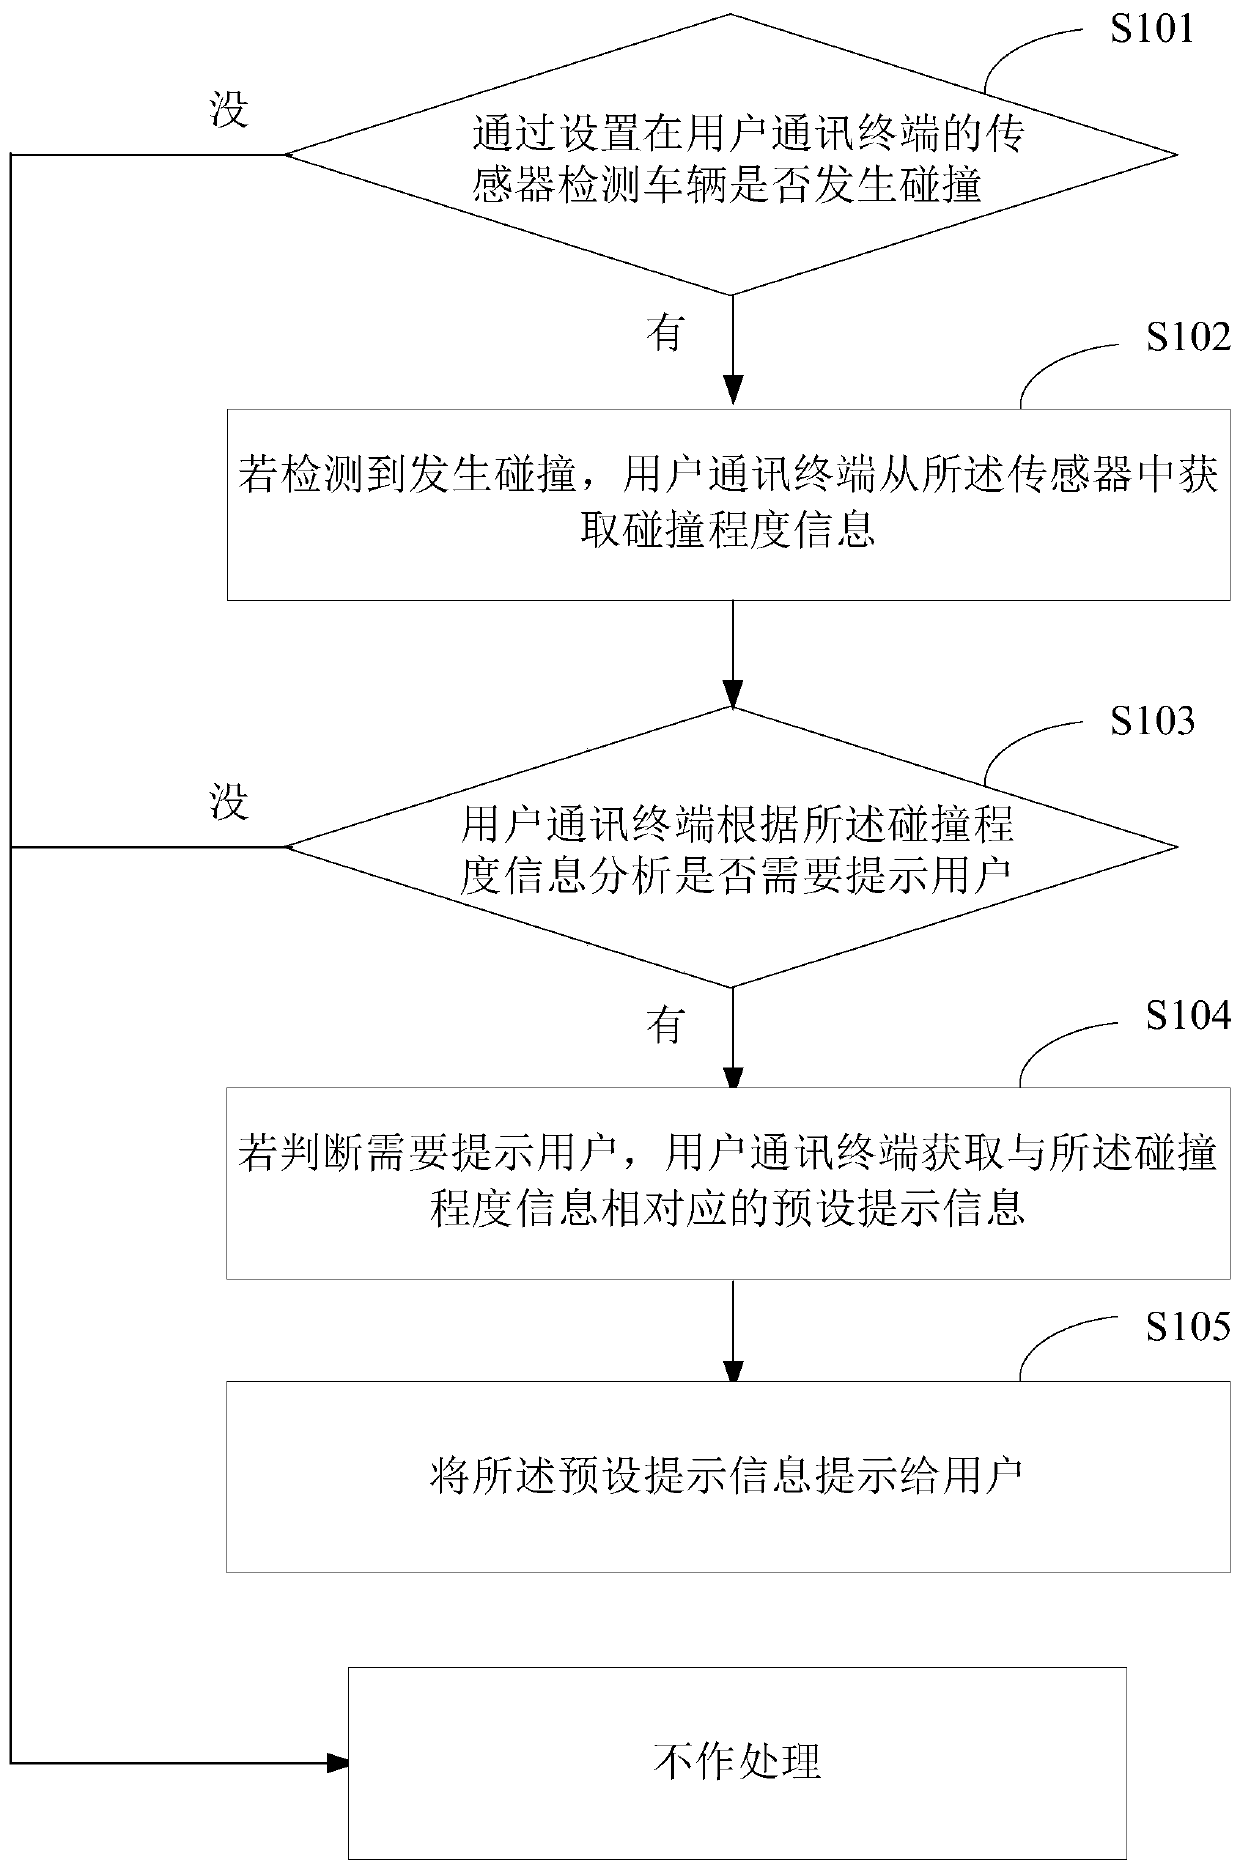 Vehicle, user communication terminal and collision accident detection processing method